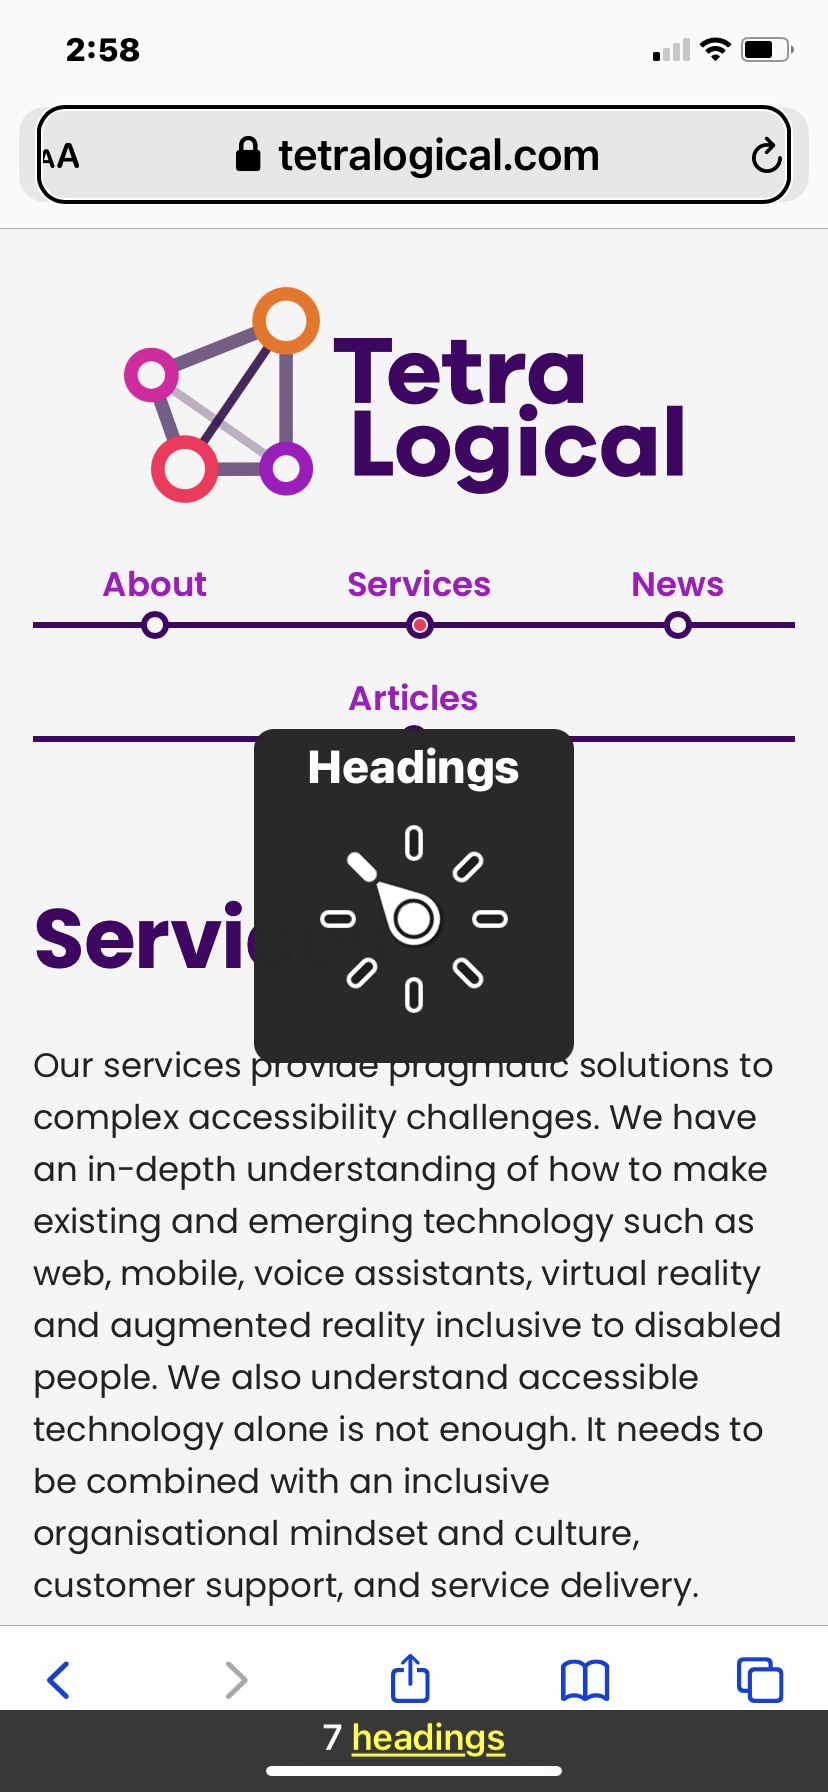 The iOS rotor showing the headings options selected on the TetraLogical homepage